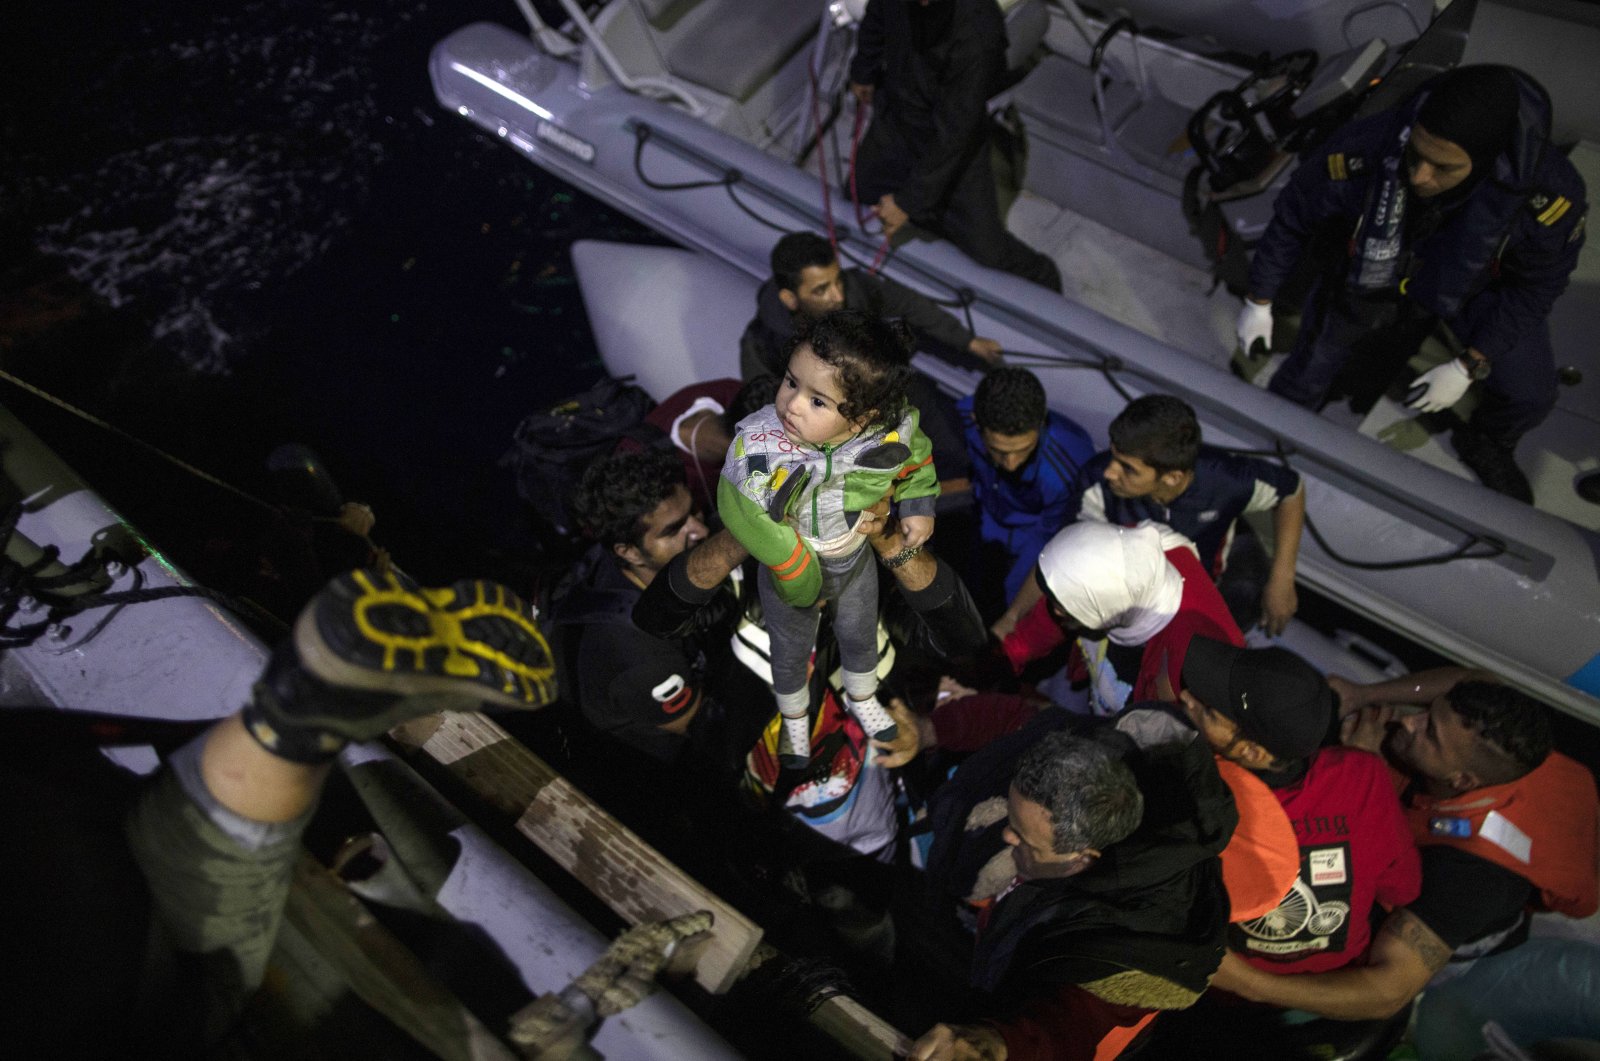 Refugees and migrants board a coast guard ship during a rescue operation on Sept. 26, 2019, near the Greek island from Samos. (AP Photo)